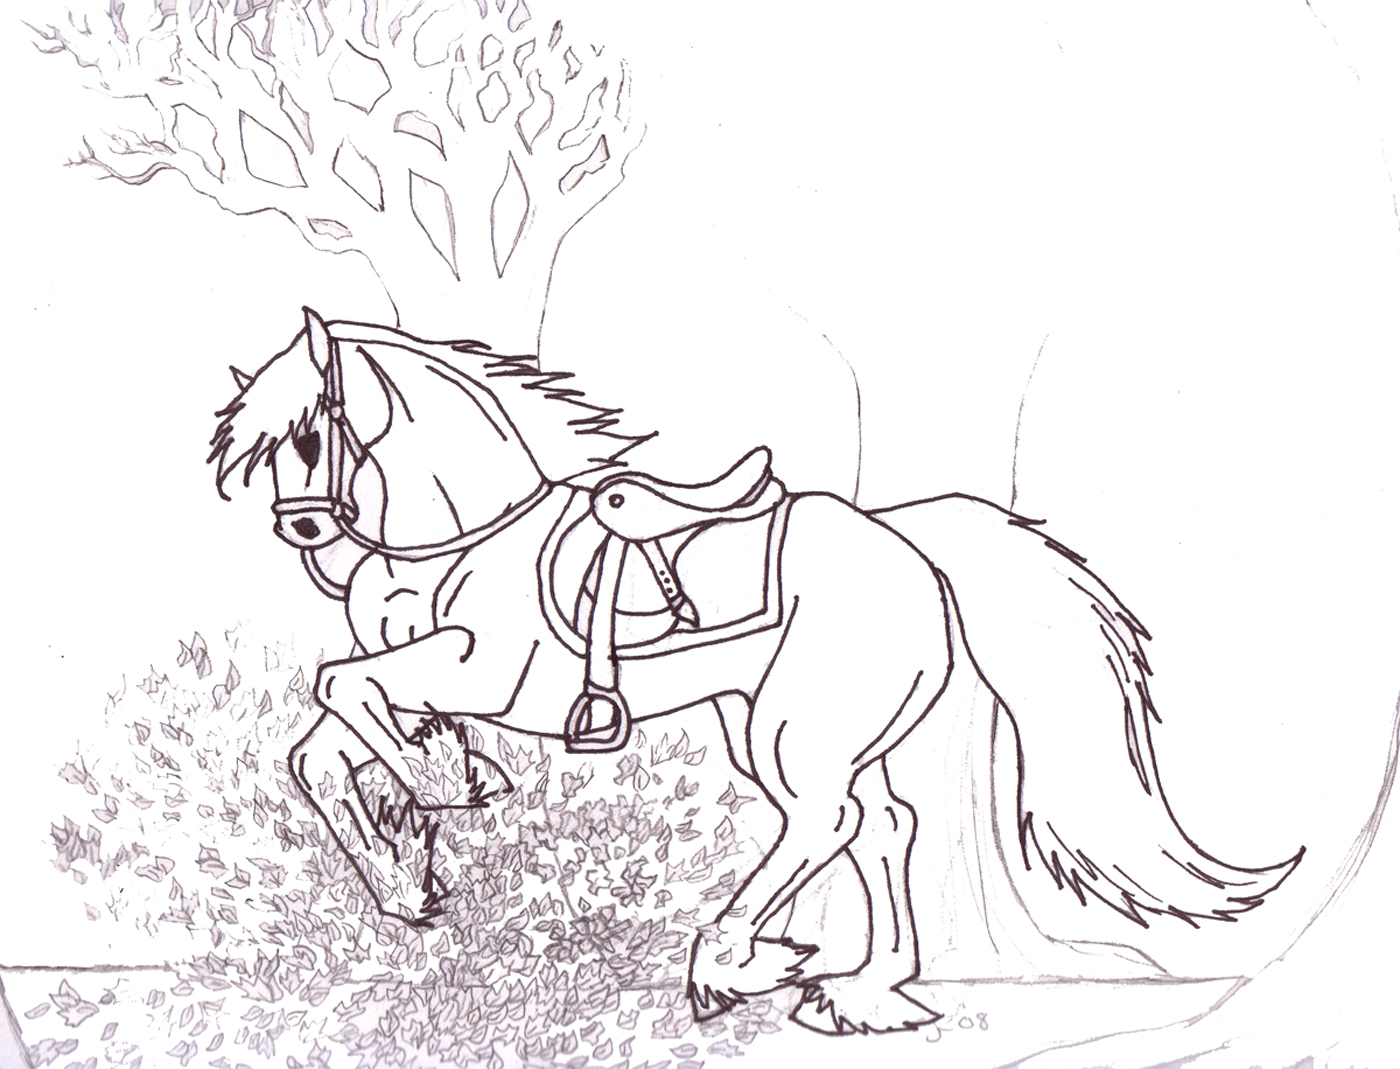 Sam in Leaves(Lineart not finished) by HoRsEwIsPeReR396